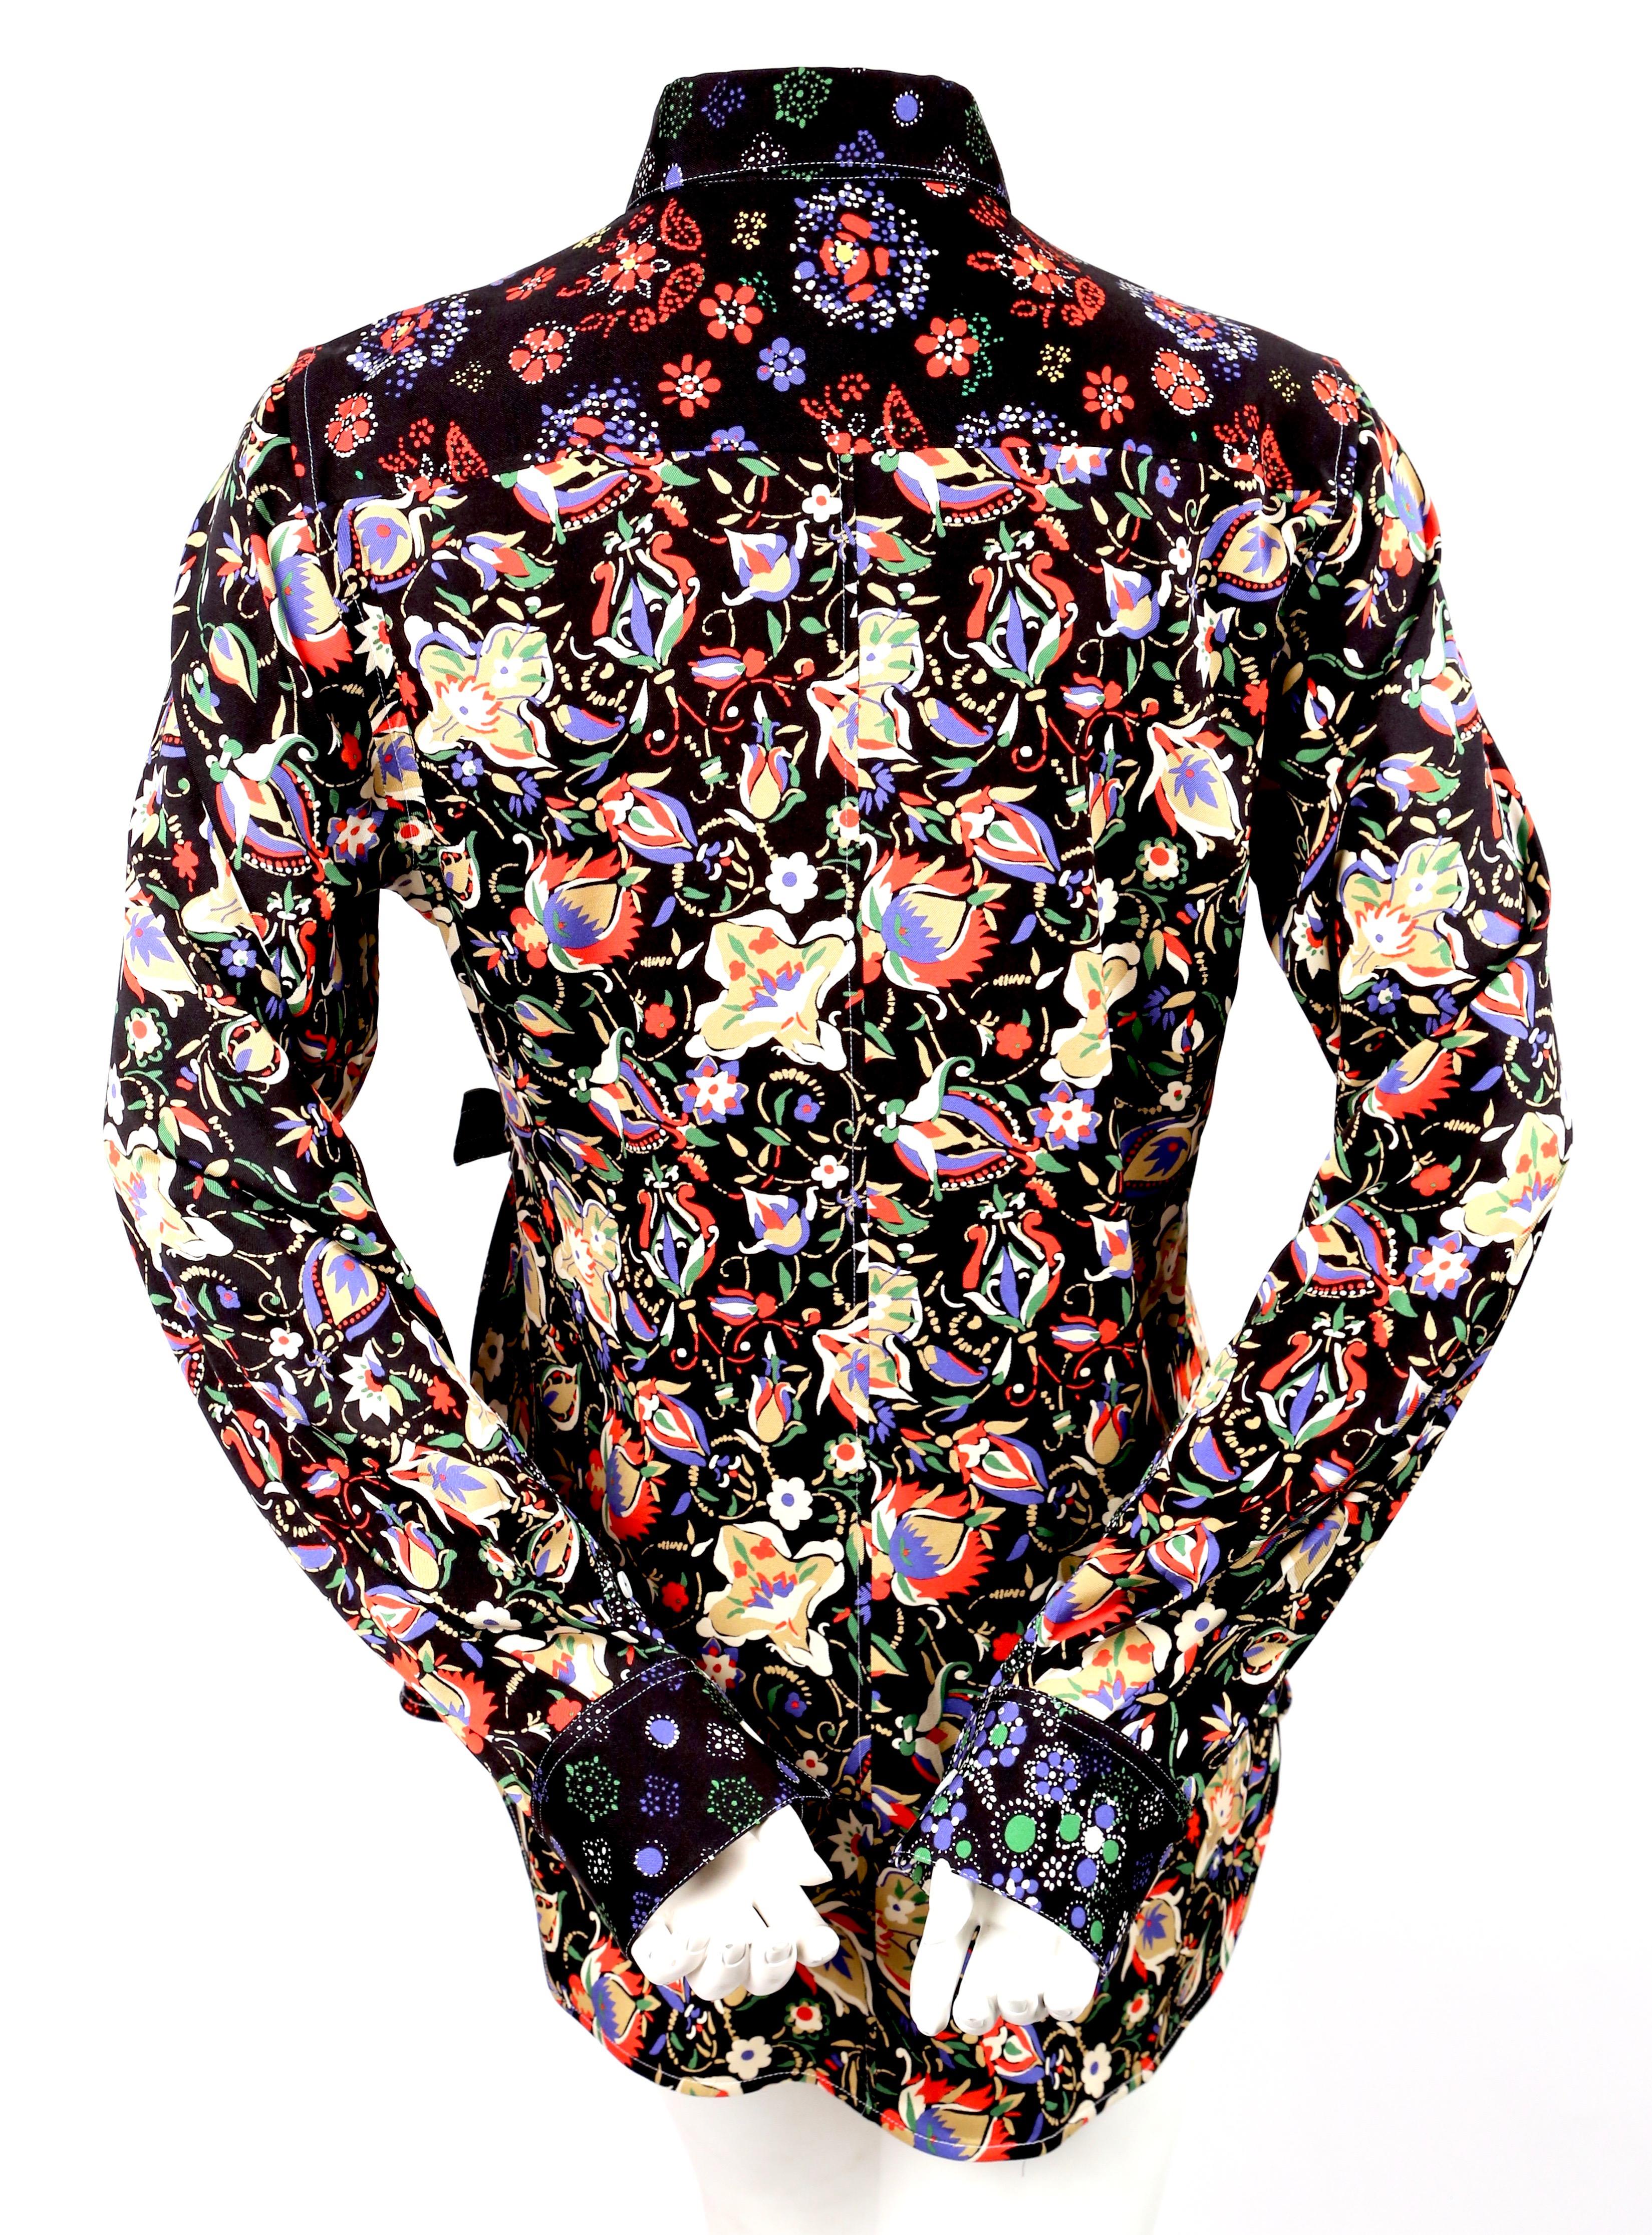 CELINE by PHOEBE PHILO floral printed silk shirt with ties 1